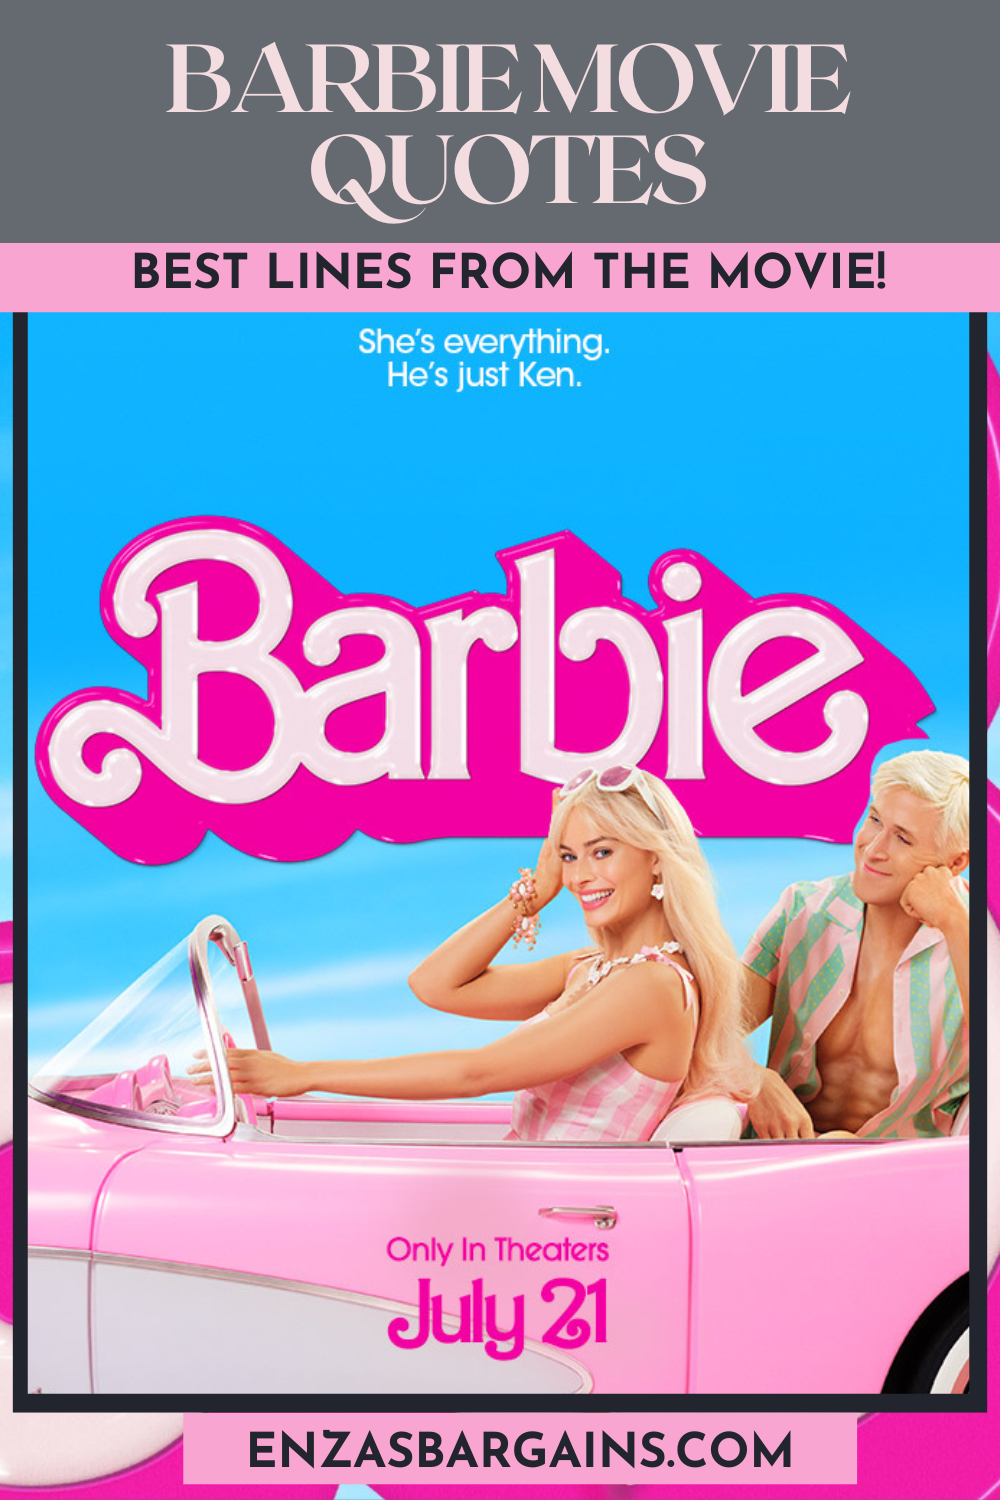 OVER 100+ Barbie Movie Quotes The BEST Quotes from the movie!